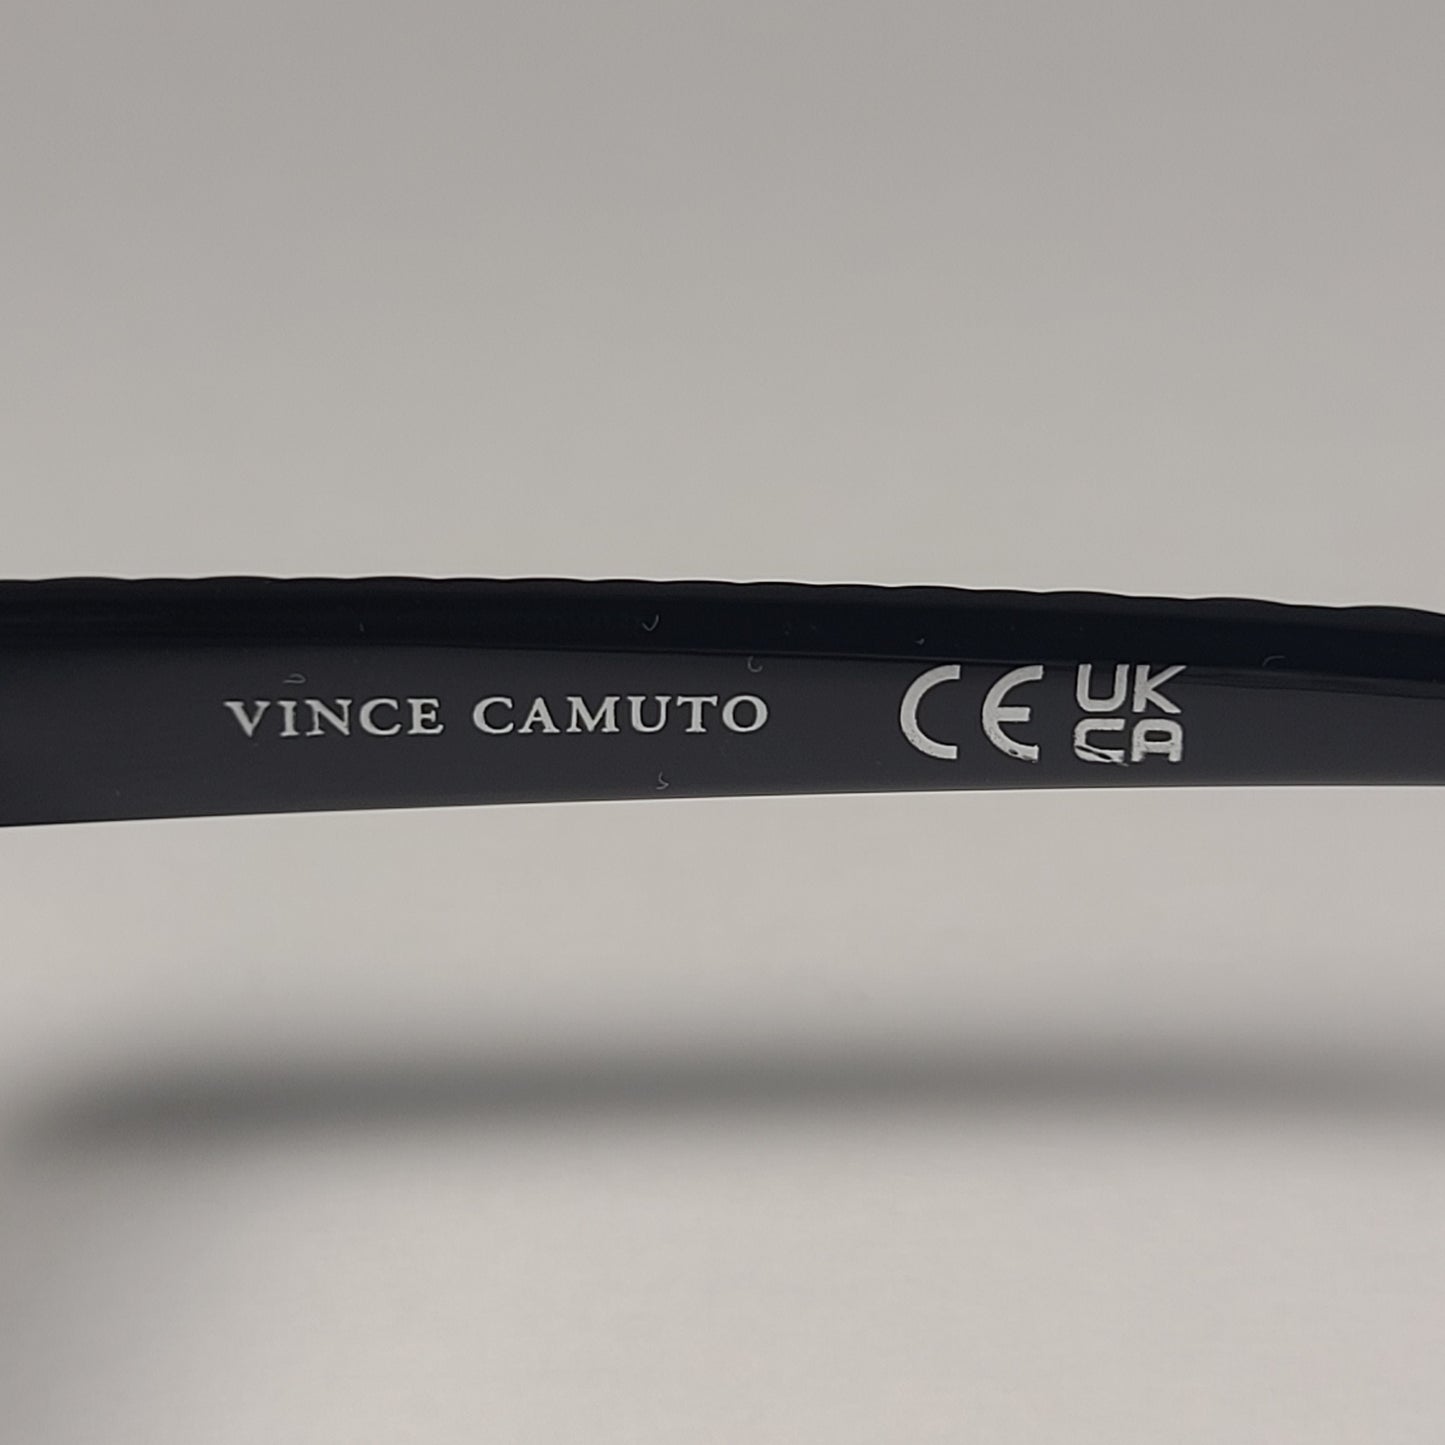 Vince Camuto VC1086 OX Butterfly Sunglasses Black Frame Smoke Gradient Lens - Sunglasses